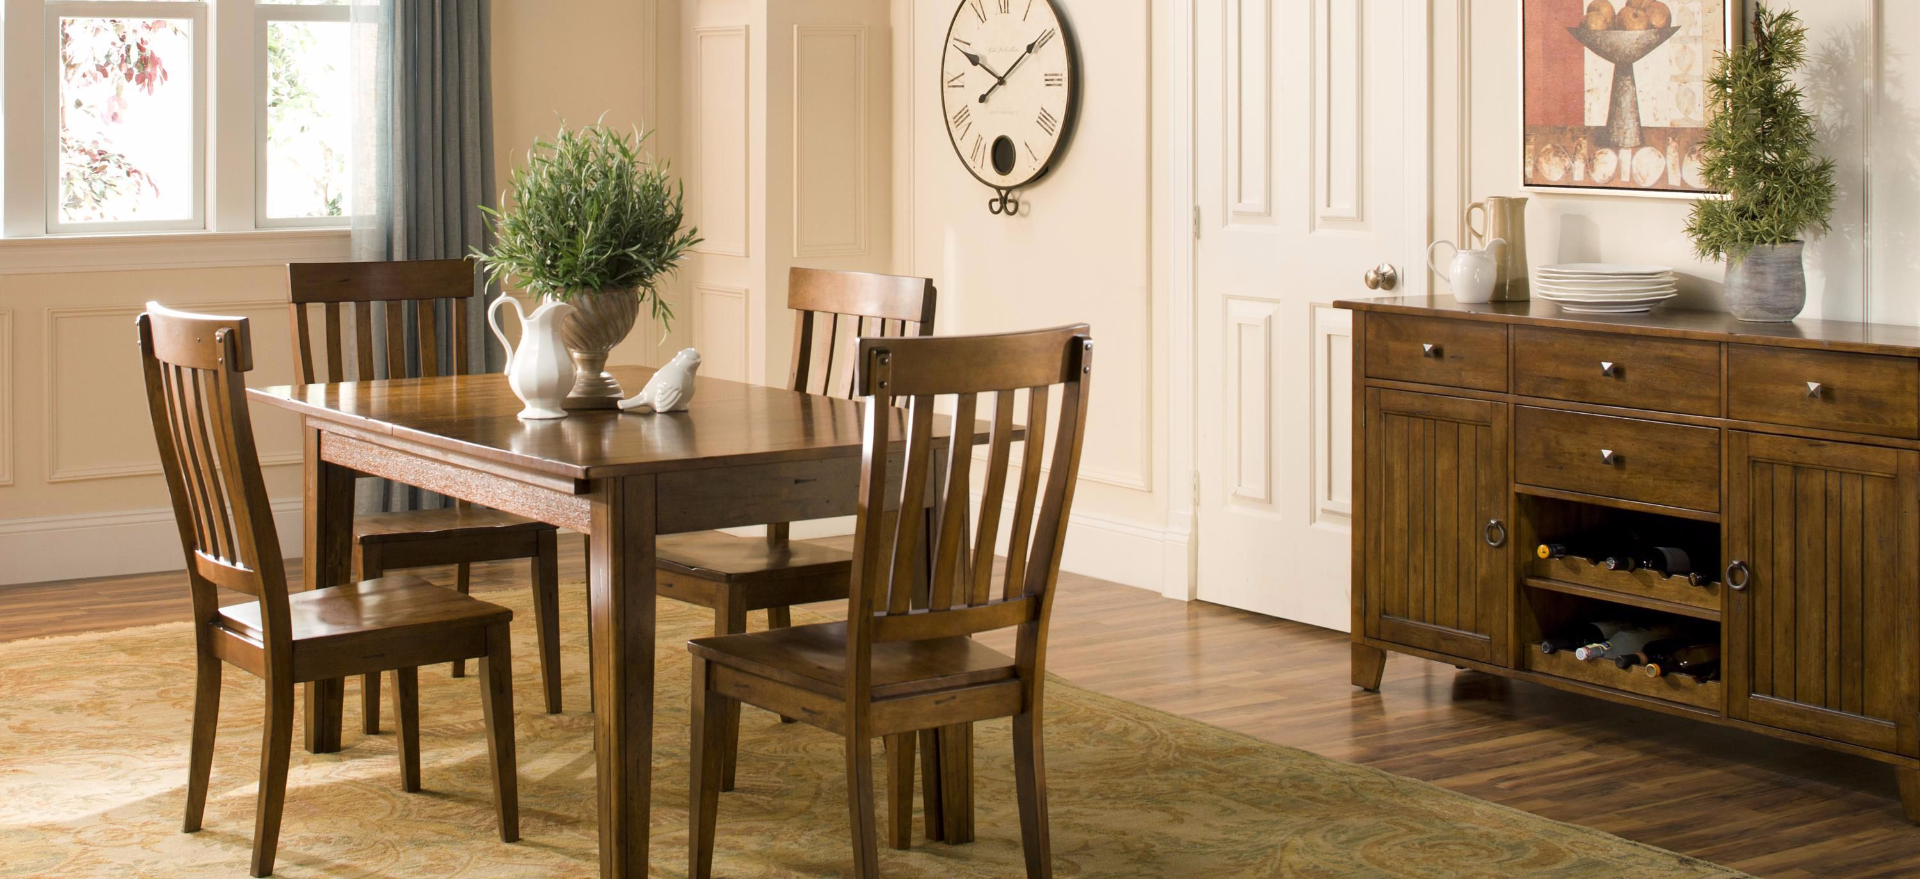 picking a dining room table